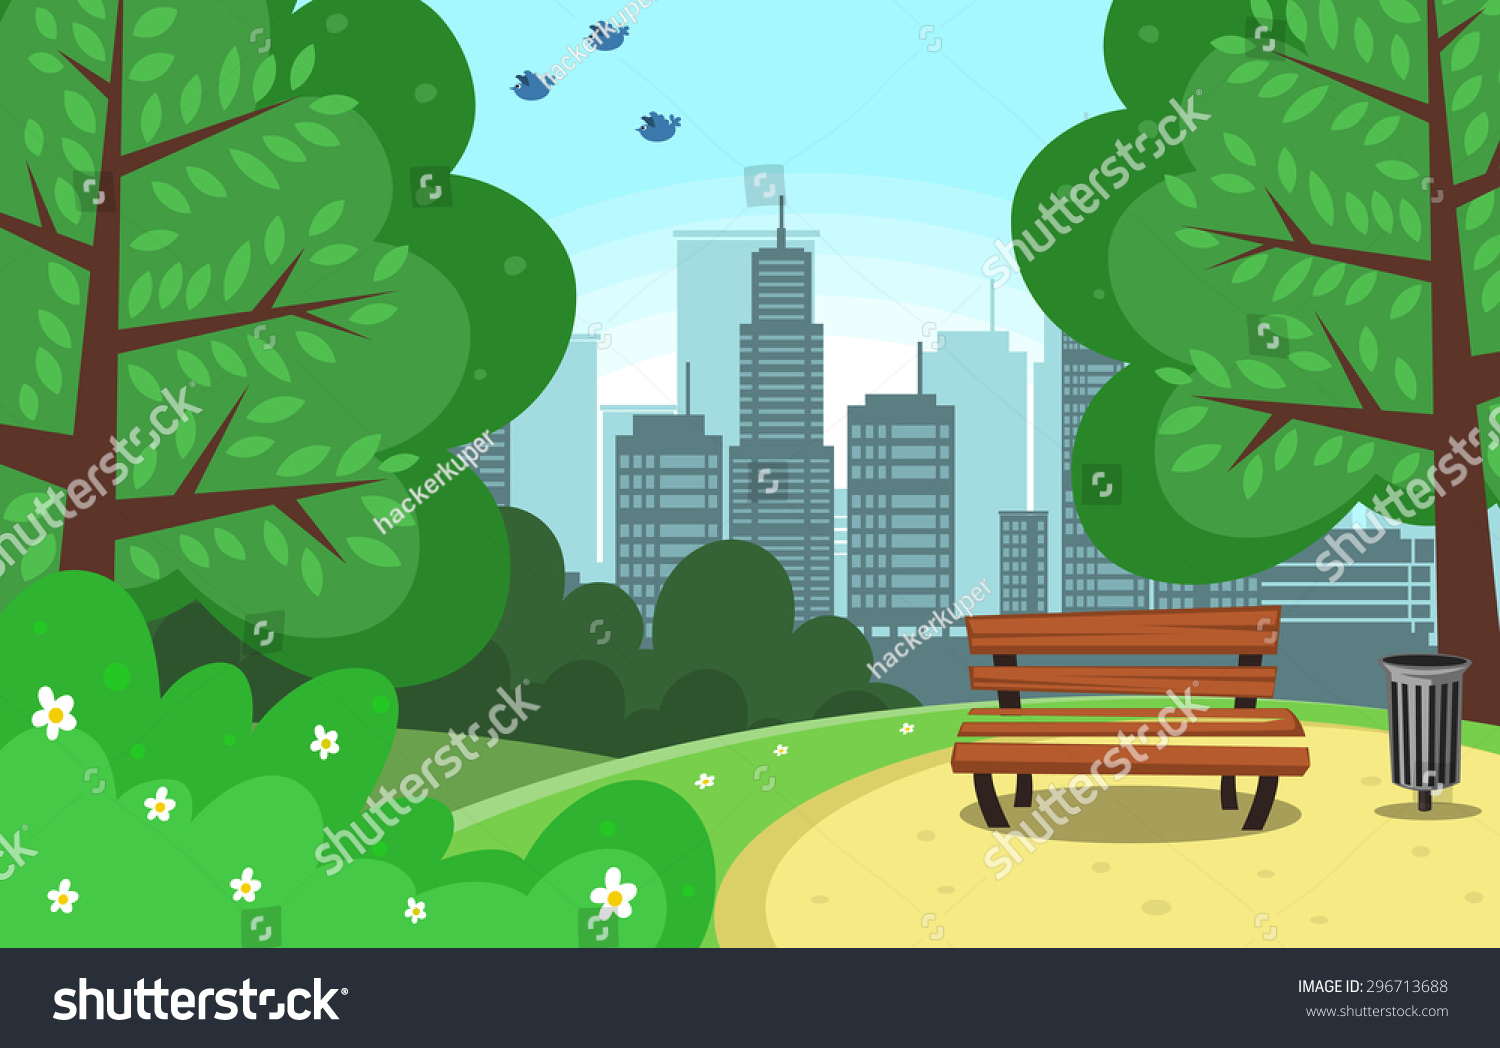 Vector Chair And Trash Can In Green Park With Town Building Background ...